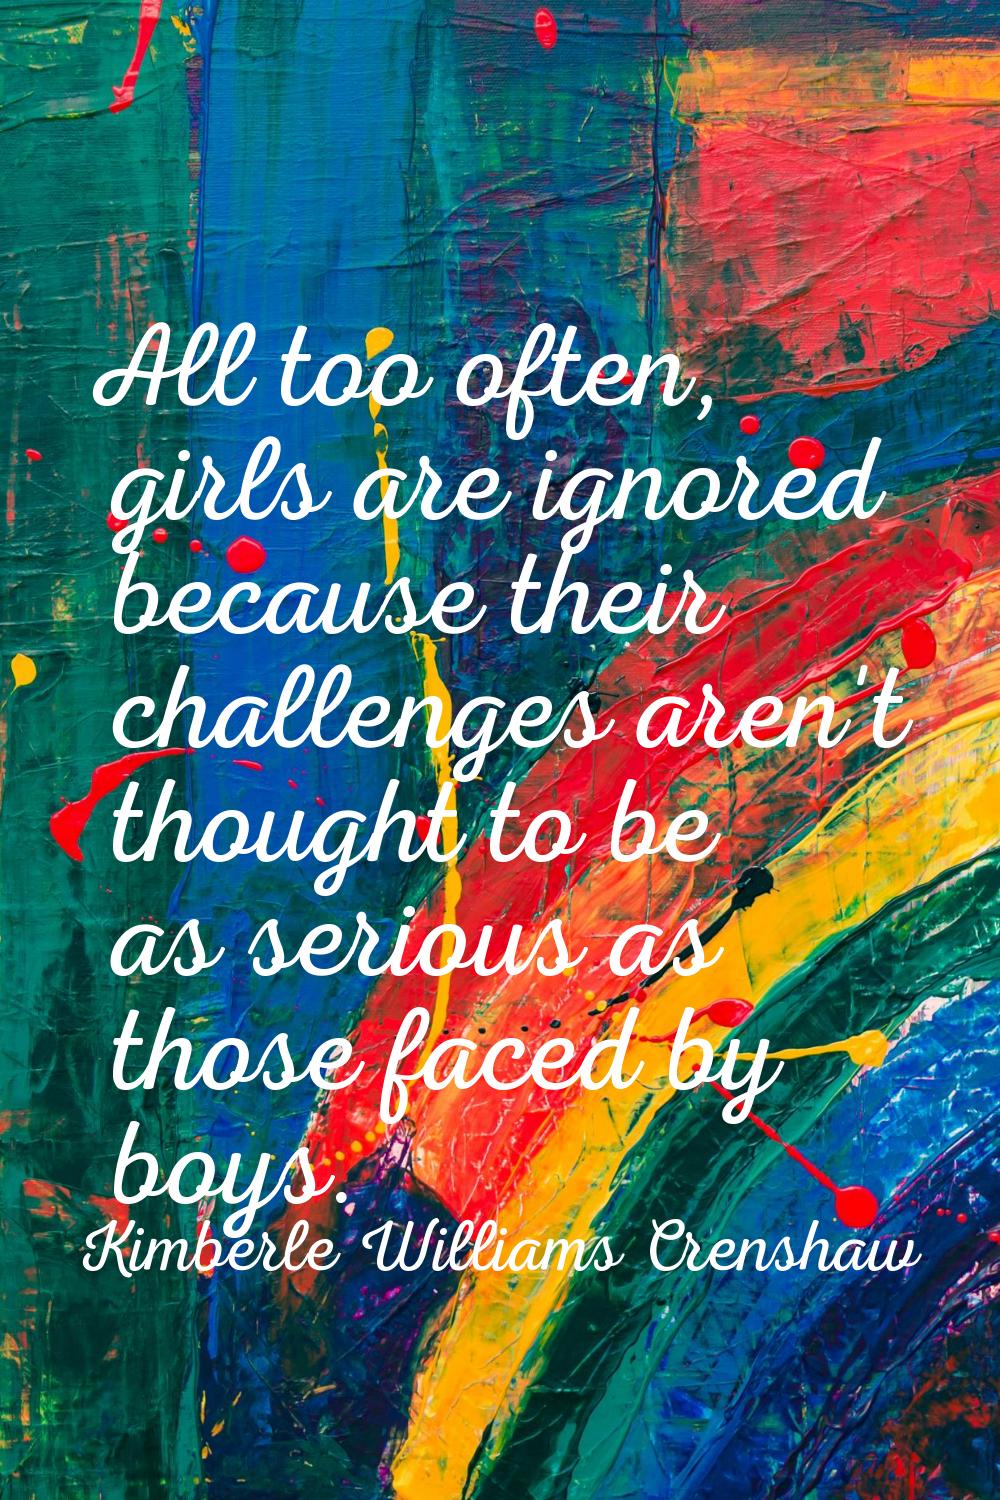 All too often, girls are ignored because their challenges aren't thought to be as serious as those 